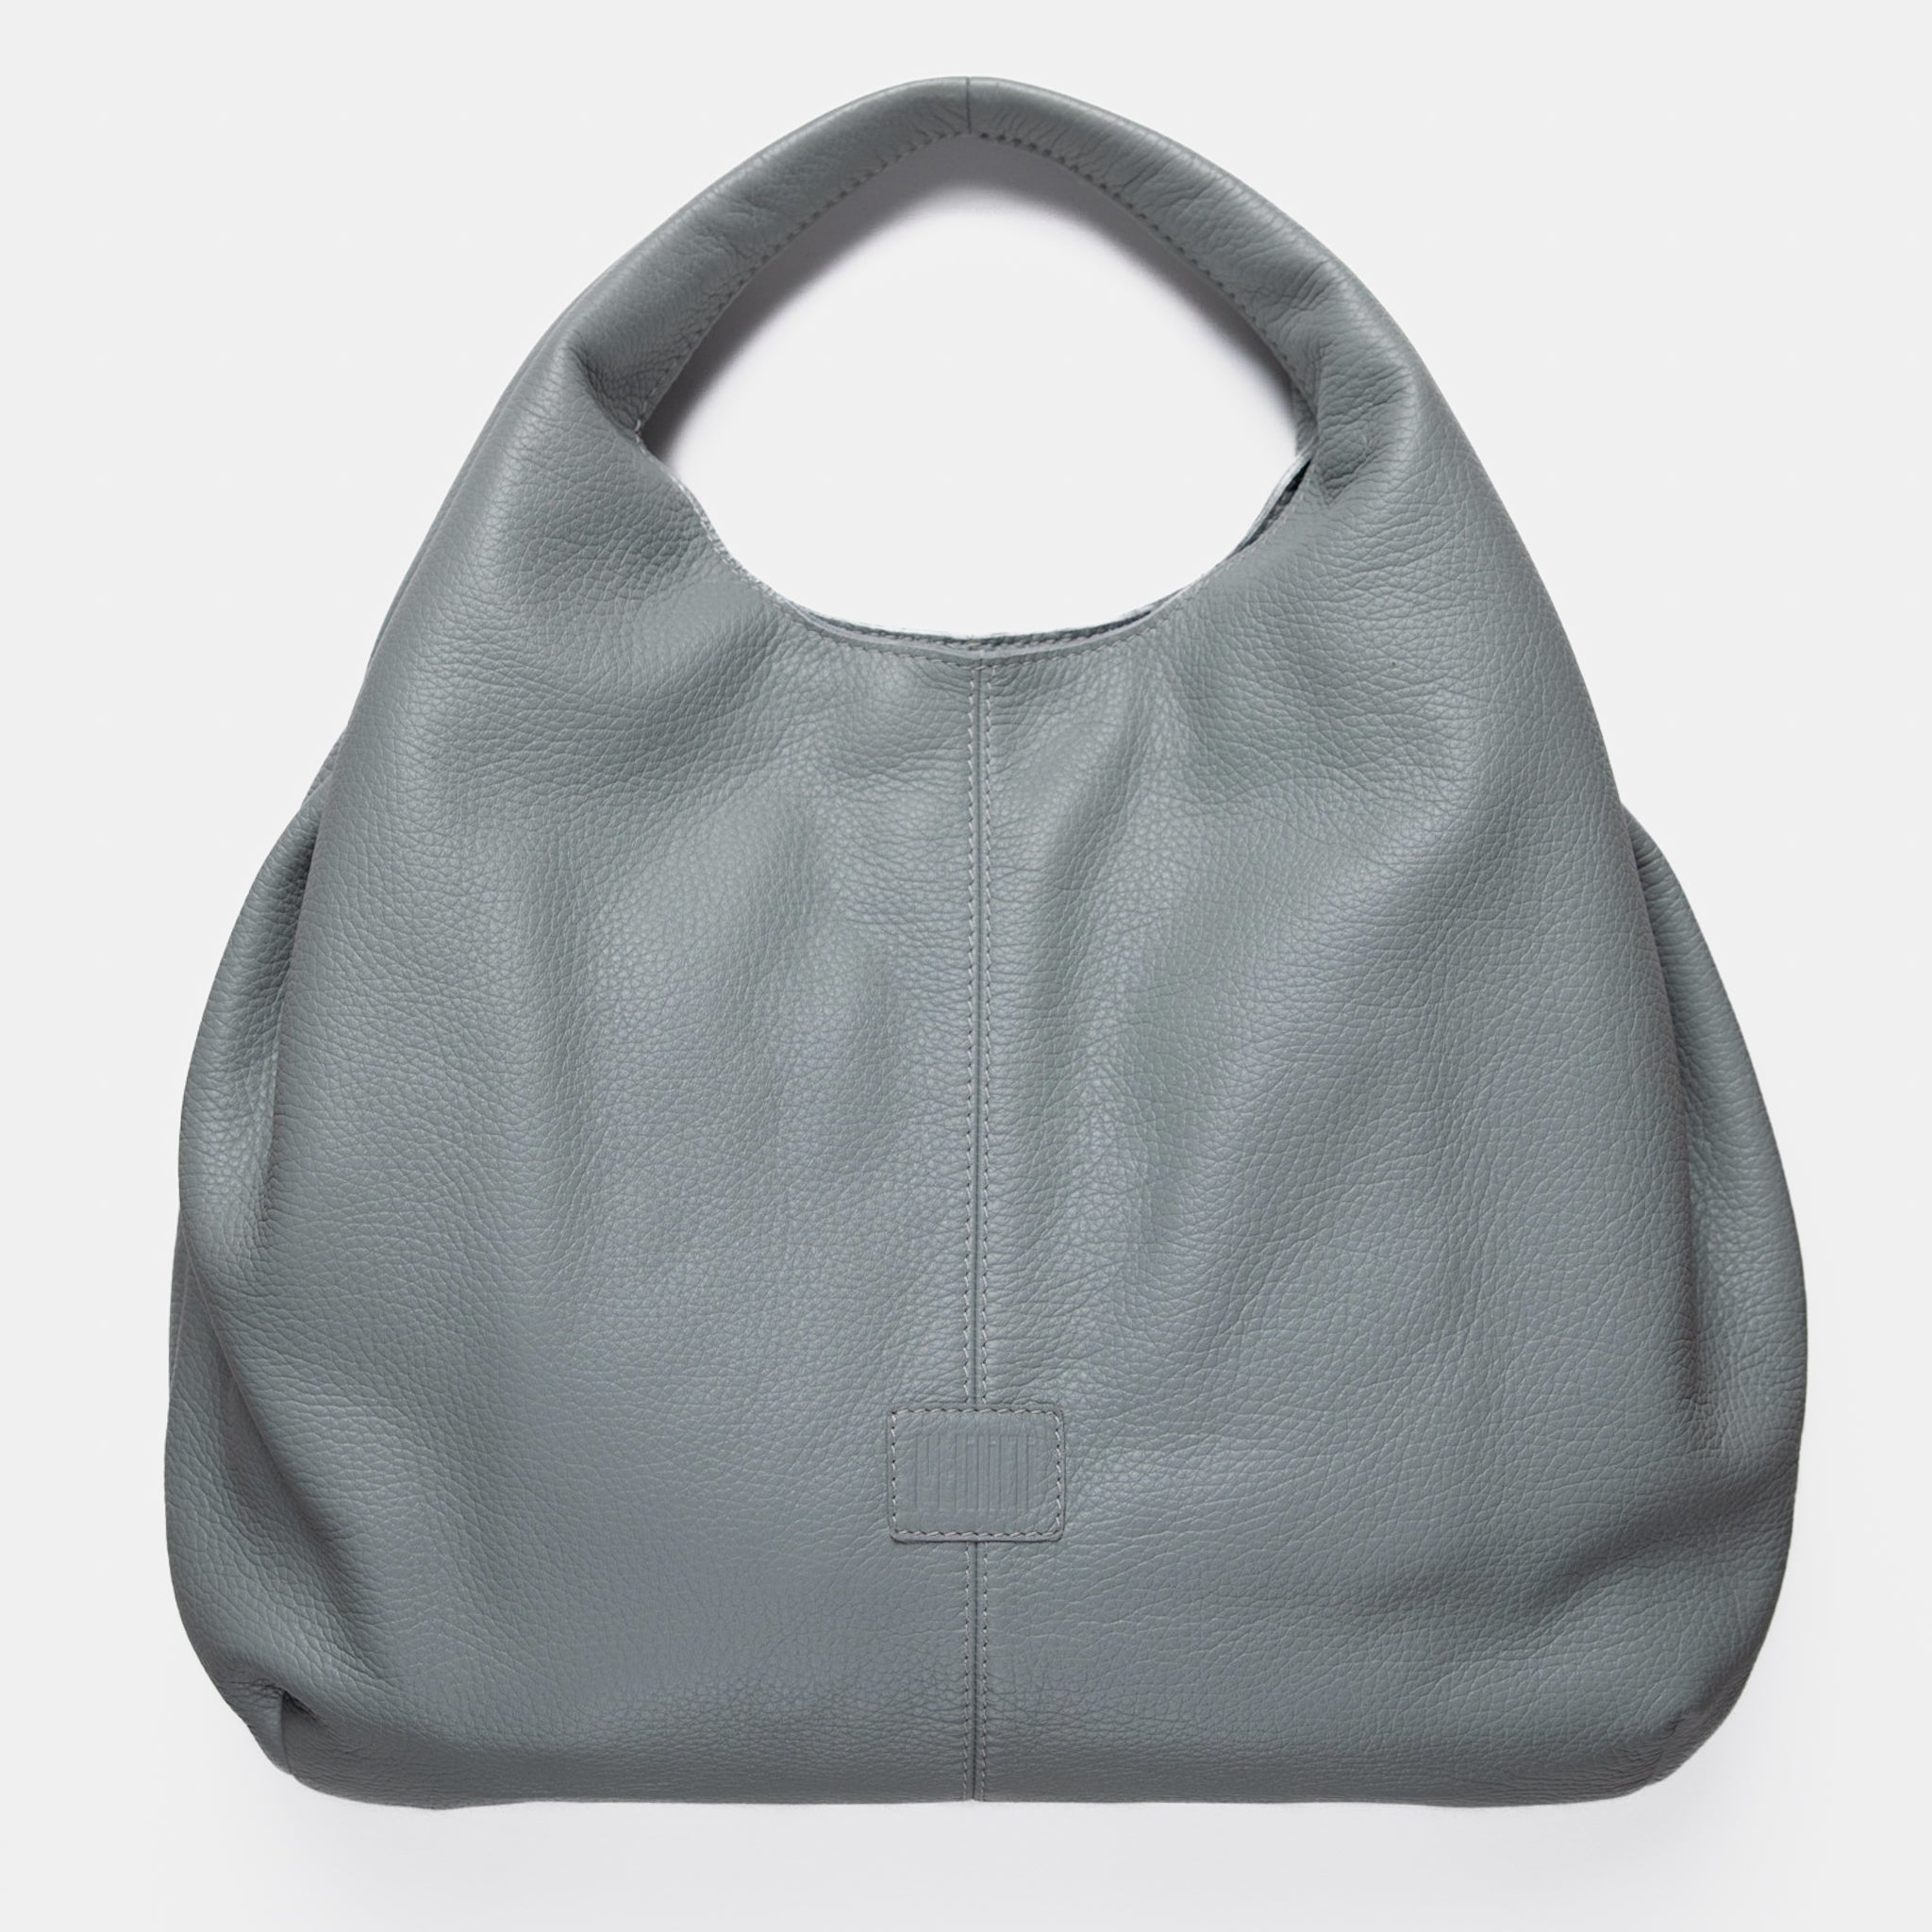 Leather bag in grey from Philini brand